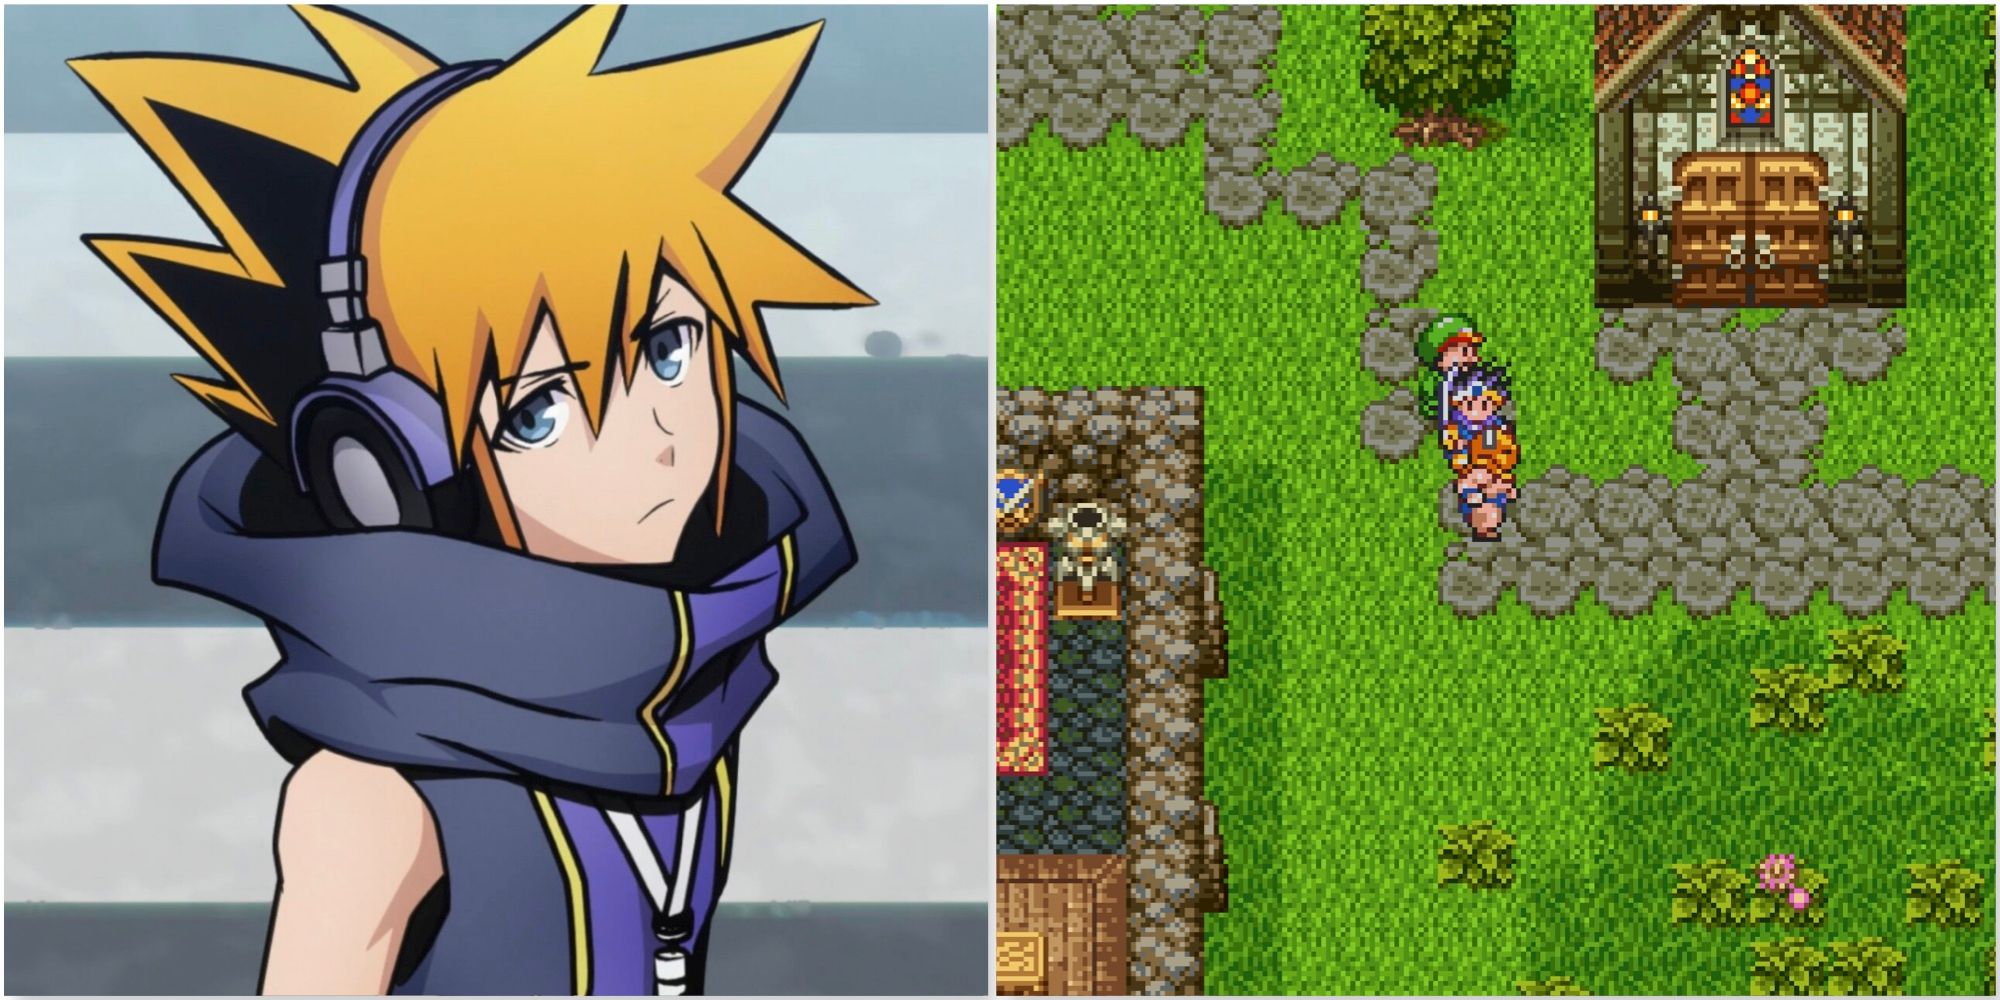 Neku in The World Ends With You and Exploring a town in Dragon Quest 3 The Seeds Of Salvation